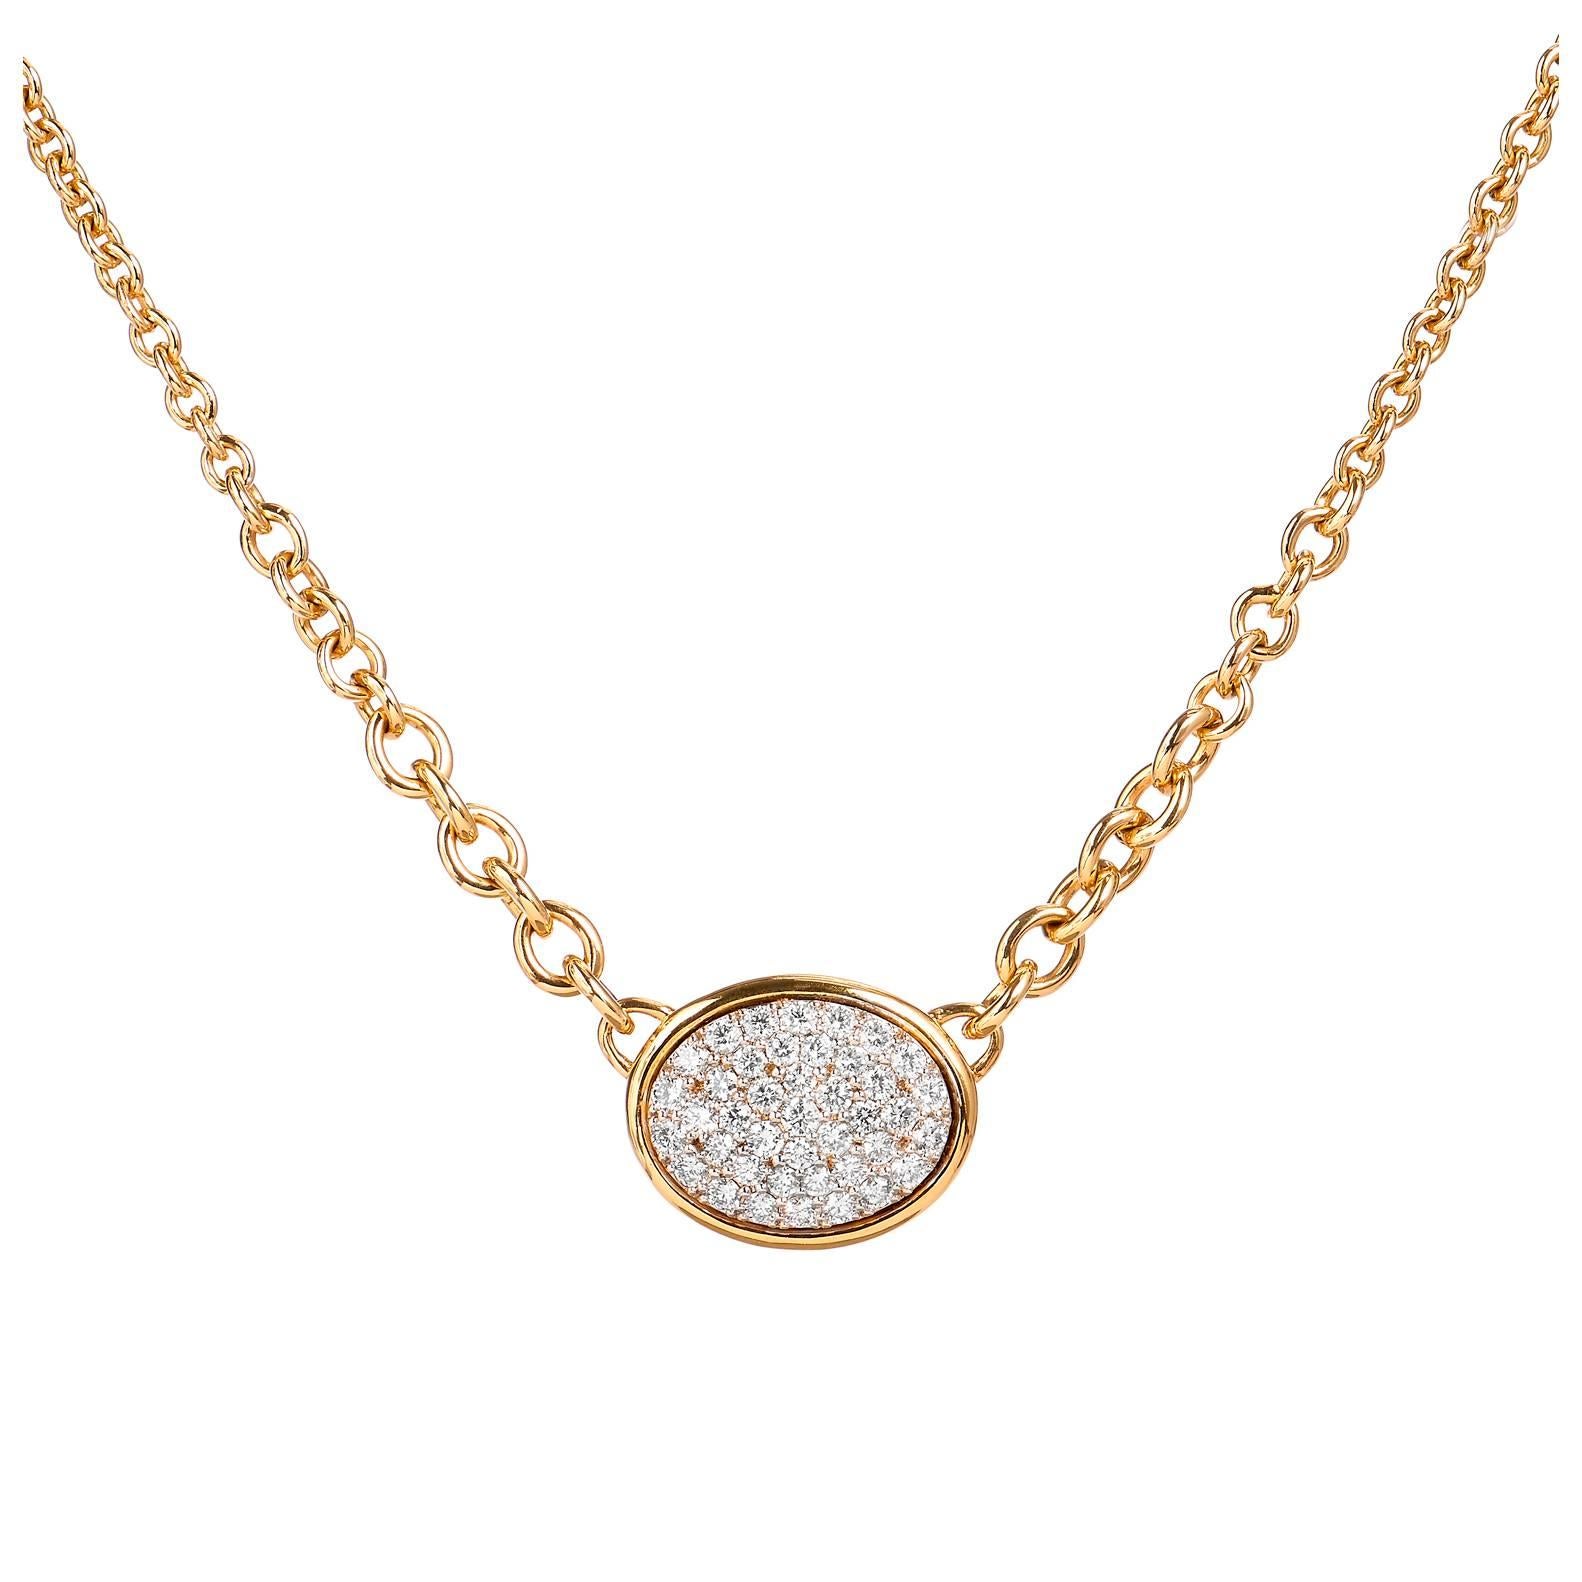 1.99 Carat of Diamonds Set in 14 Karat Gold Oval Shaped Pave Necklace For Sale